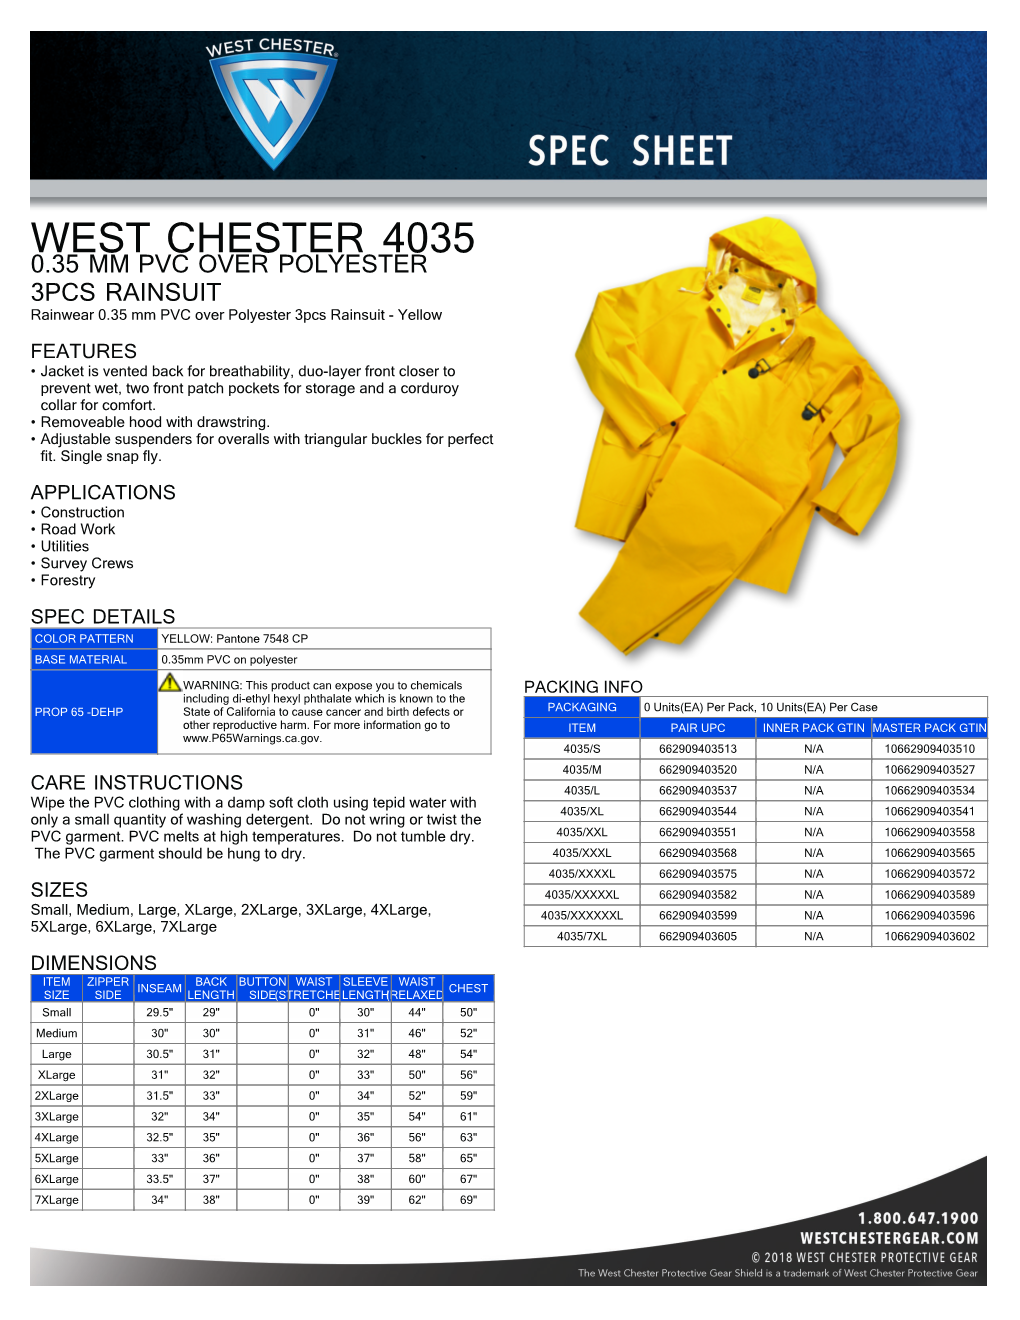 West Chester 4035